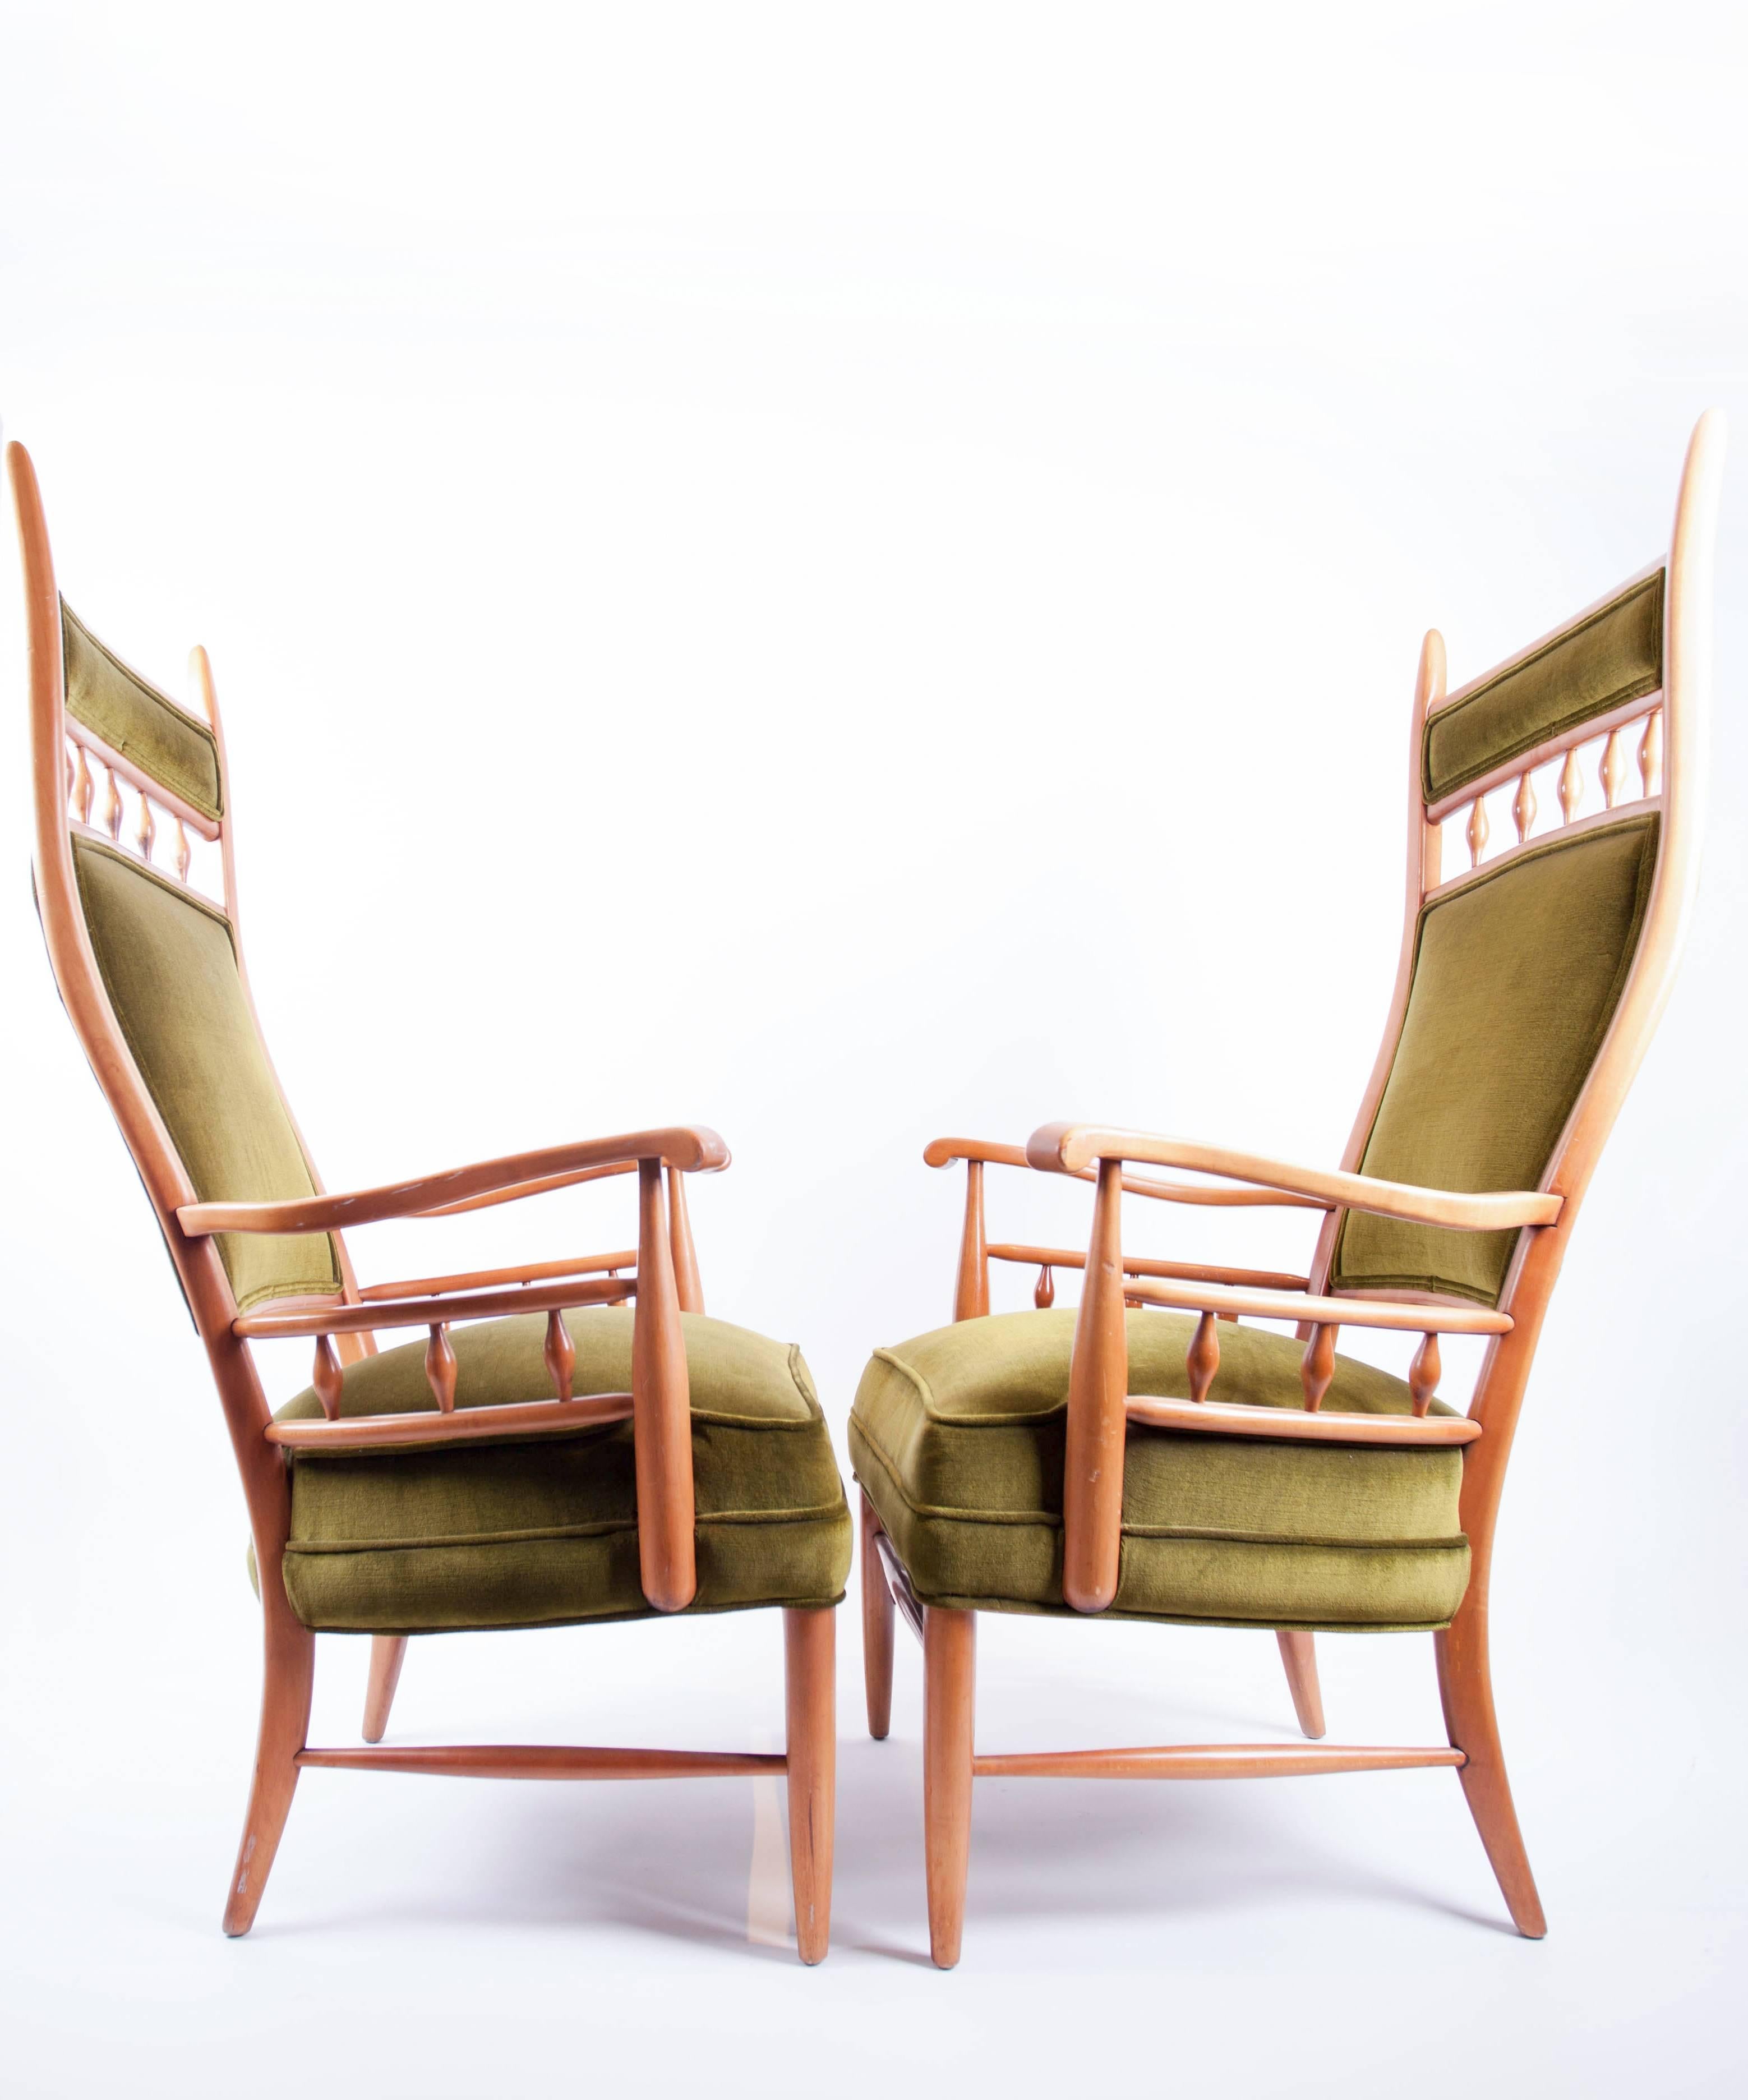 Mid-20th Century Pair of Tall Fruitwood Framed Armchairs by Maxwell Royal. C. 1950's. For Sale